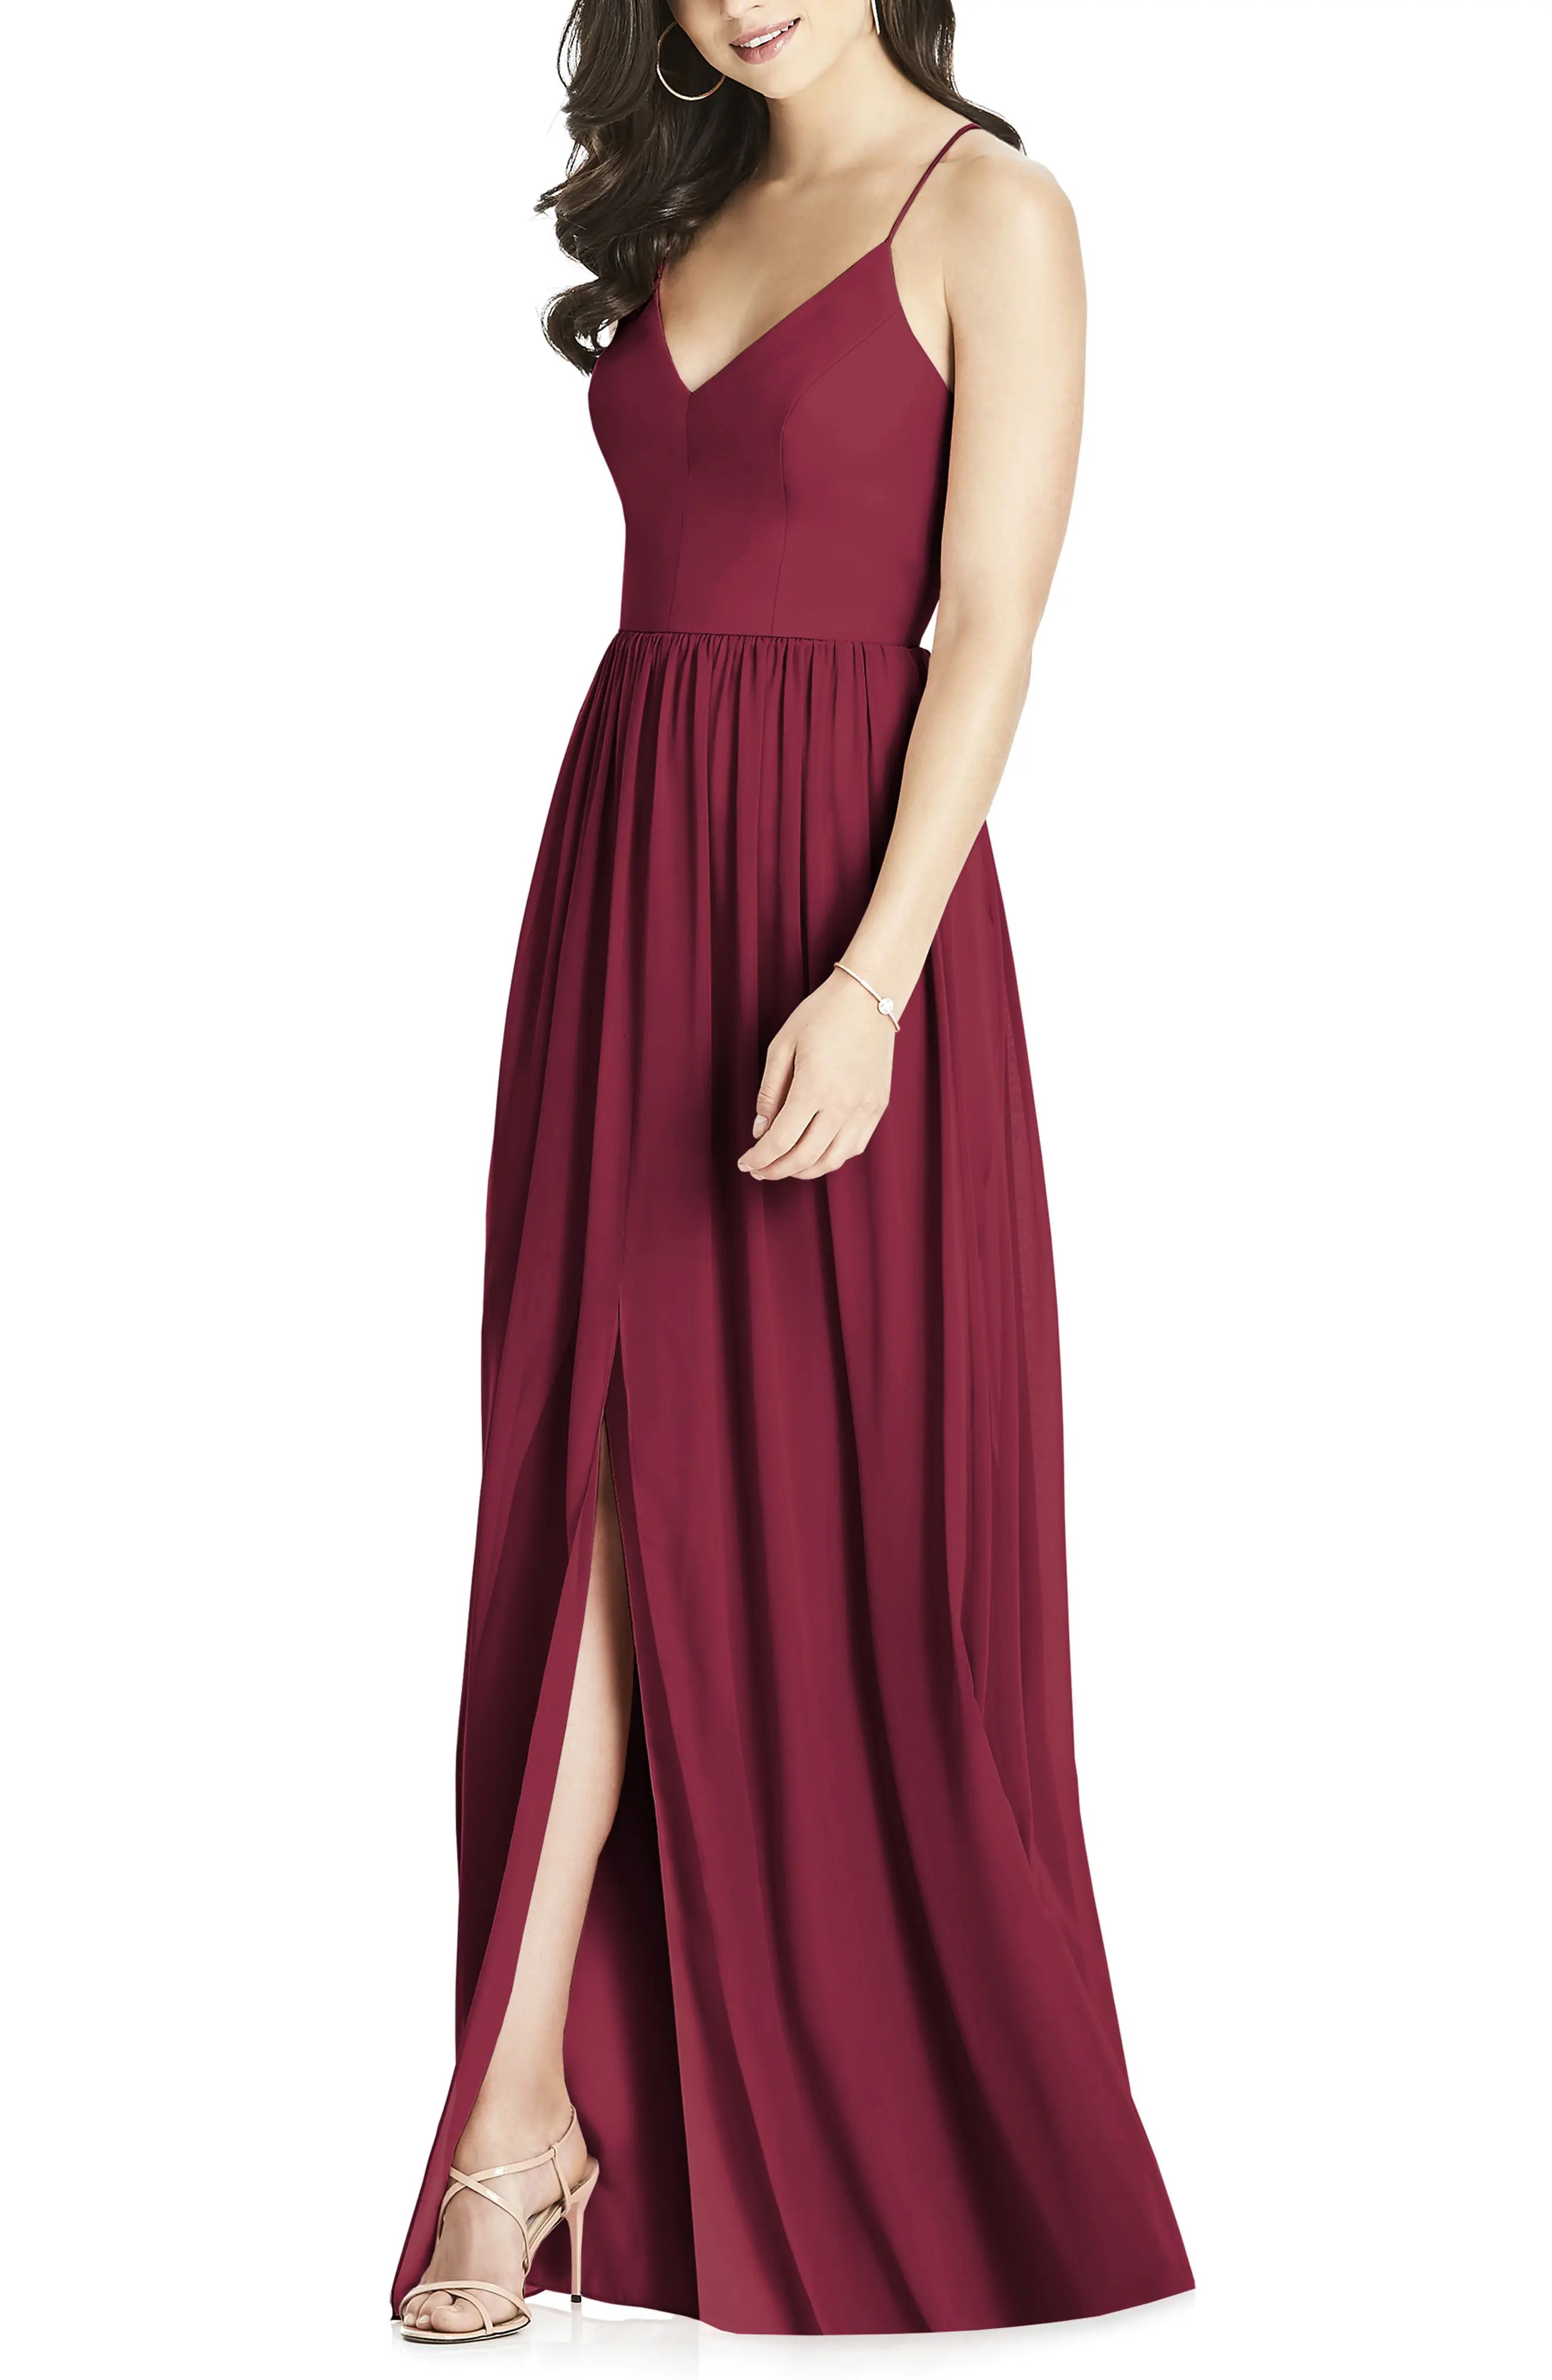 Women's Dessy Collection Spaghetti Strap Chiffon A-Line Gown, Size 2 - Red | Nordstrom